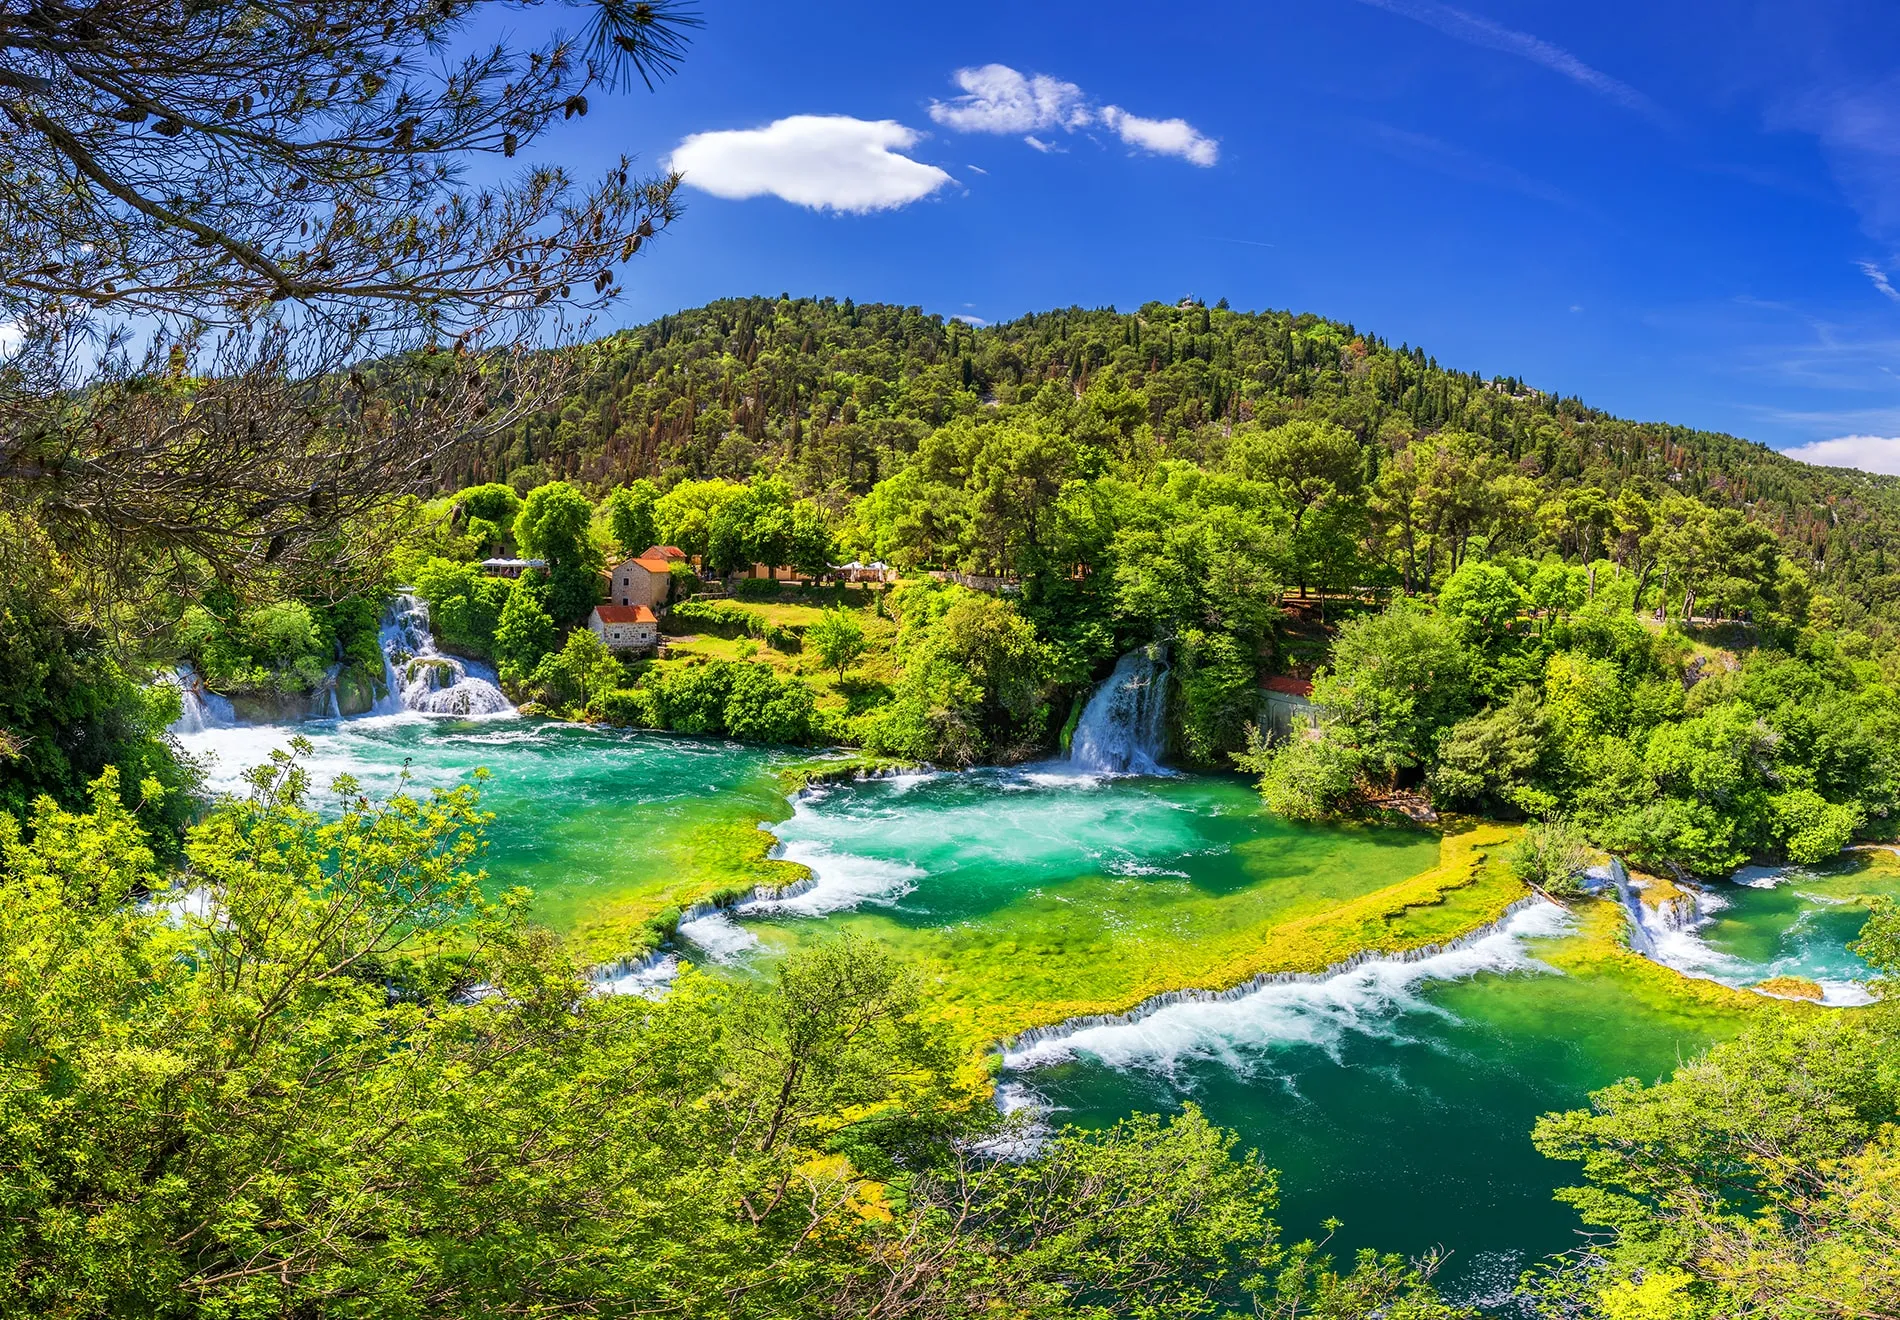 Explore the pristine wilderness of national parks like Paklenica and Krka